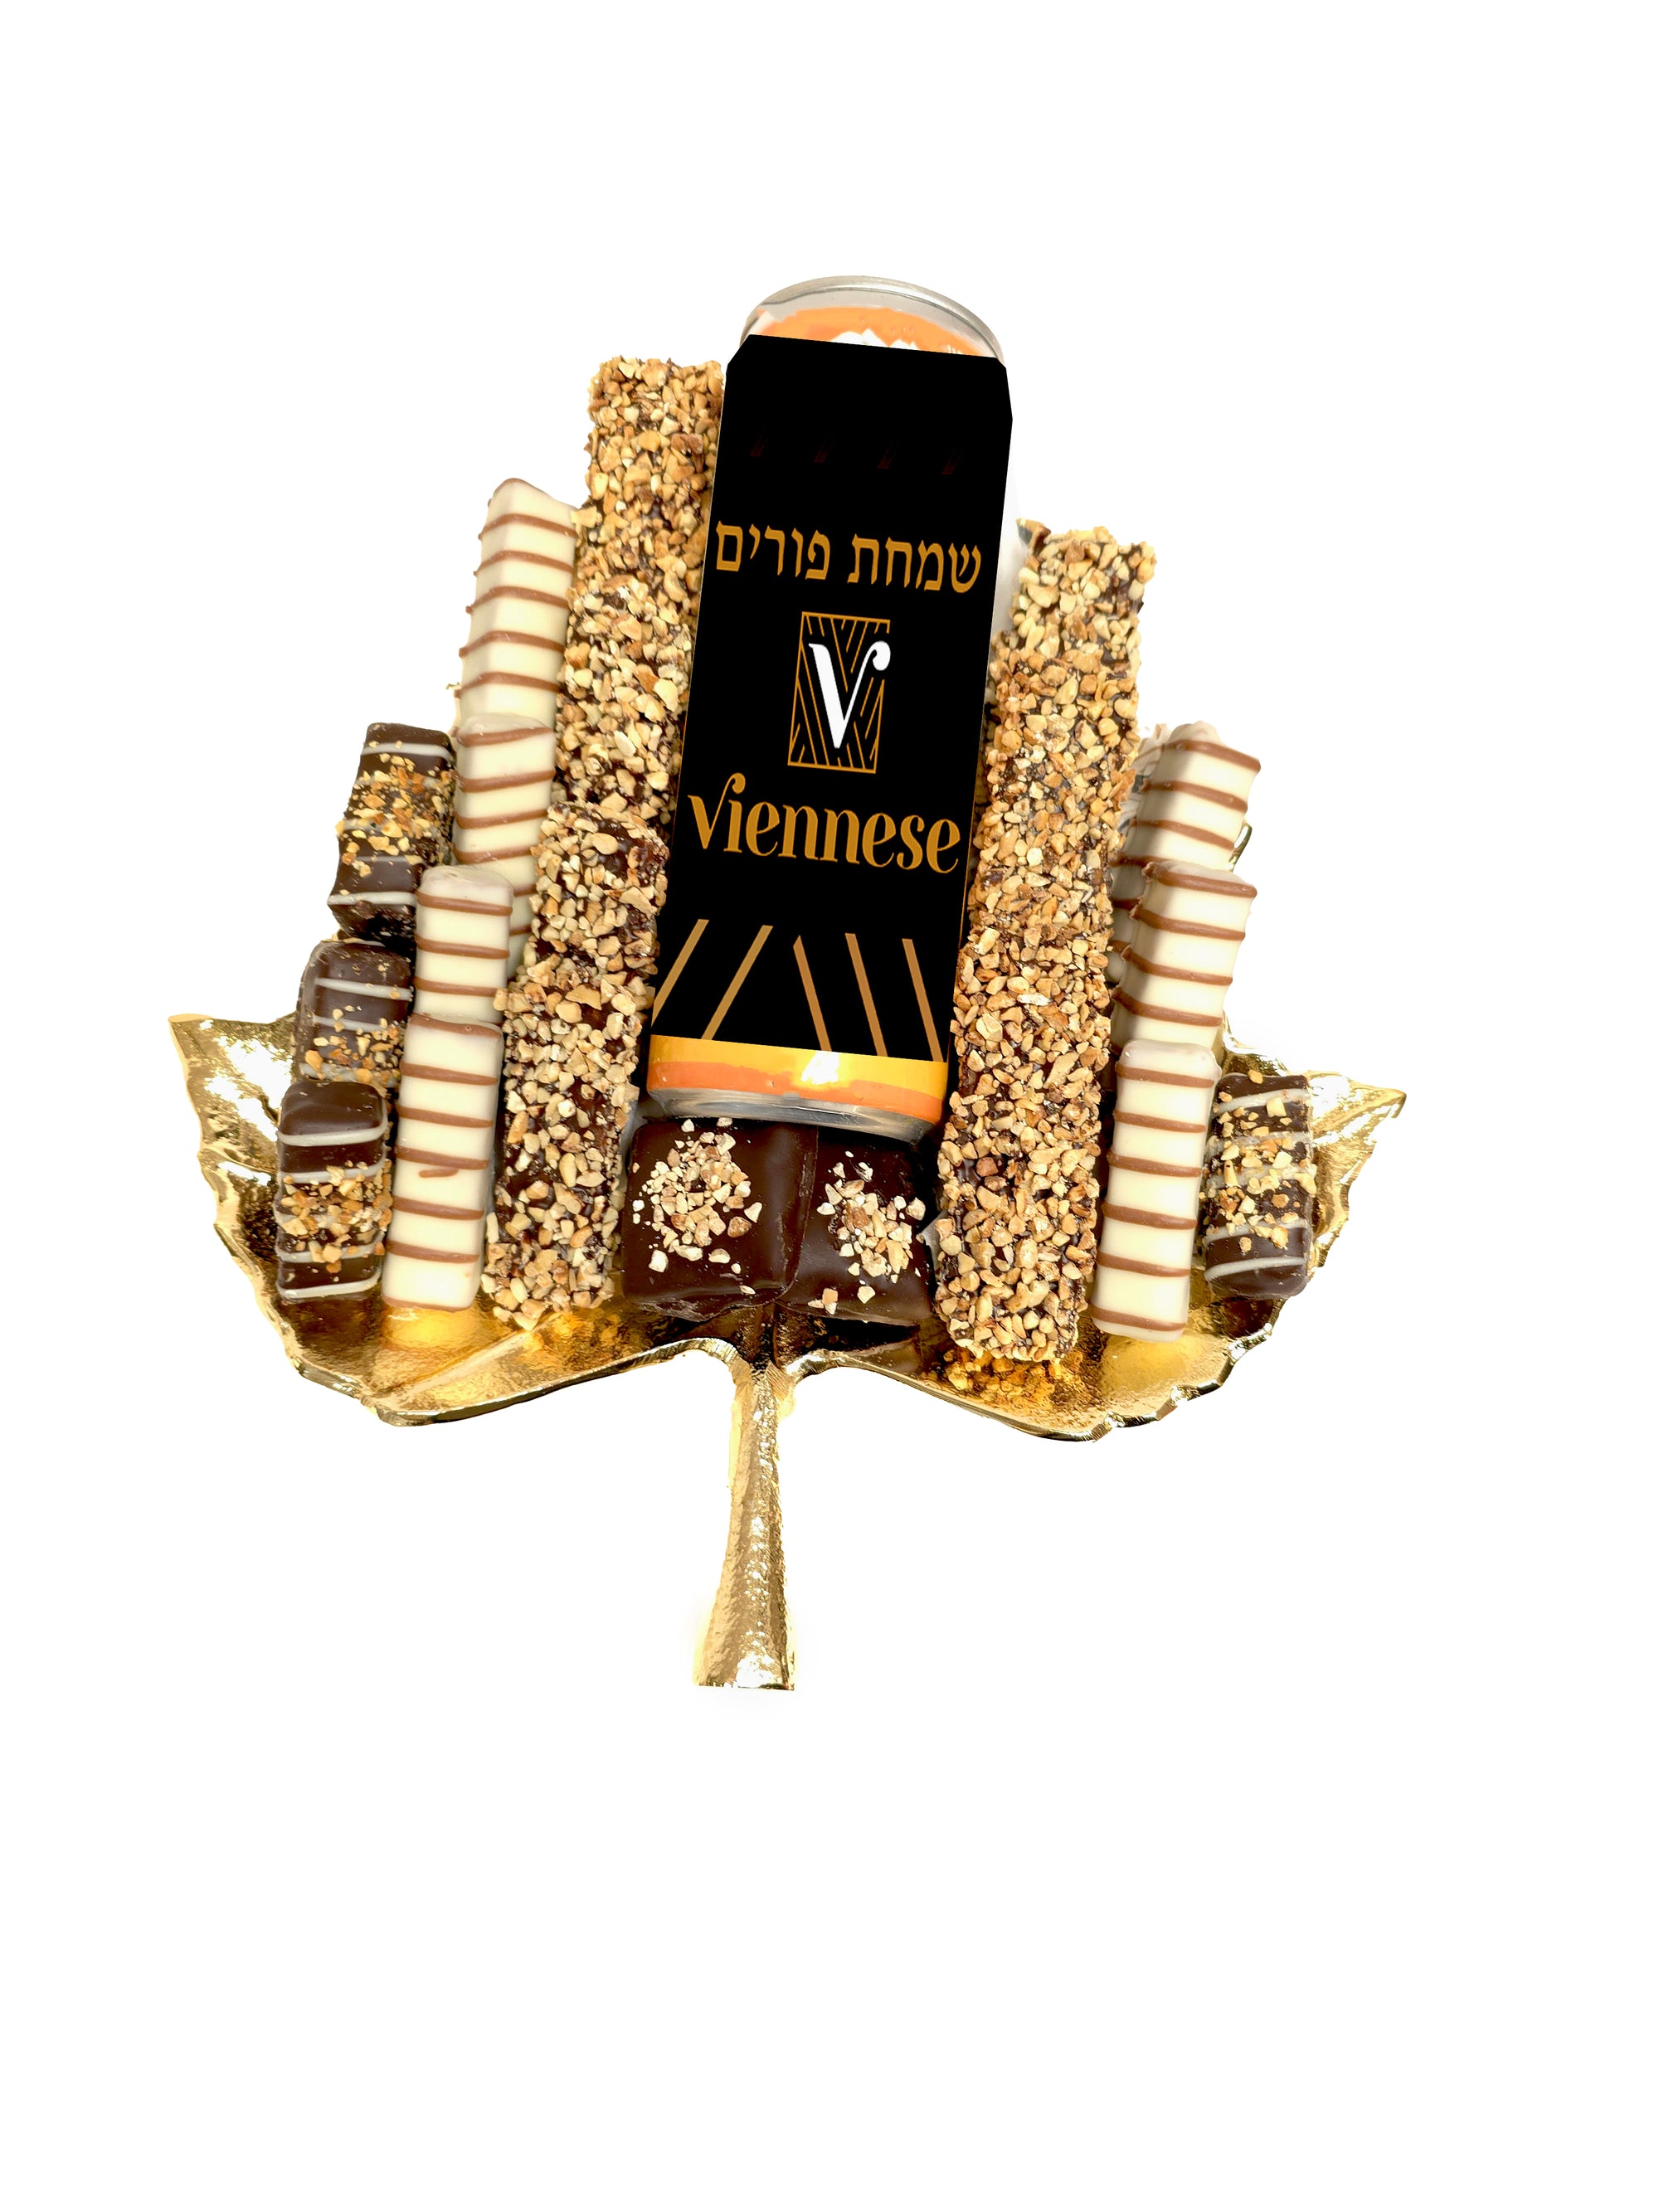 Purim Gift Gold leaf Filled With Chocolates Basket Mishloach Manos